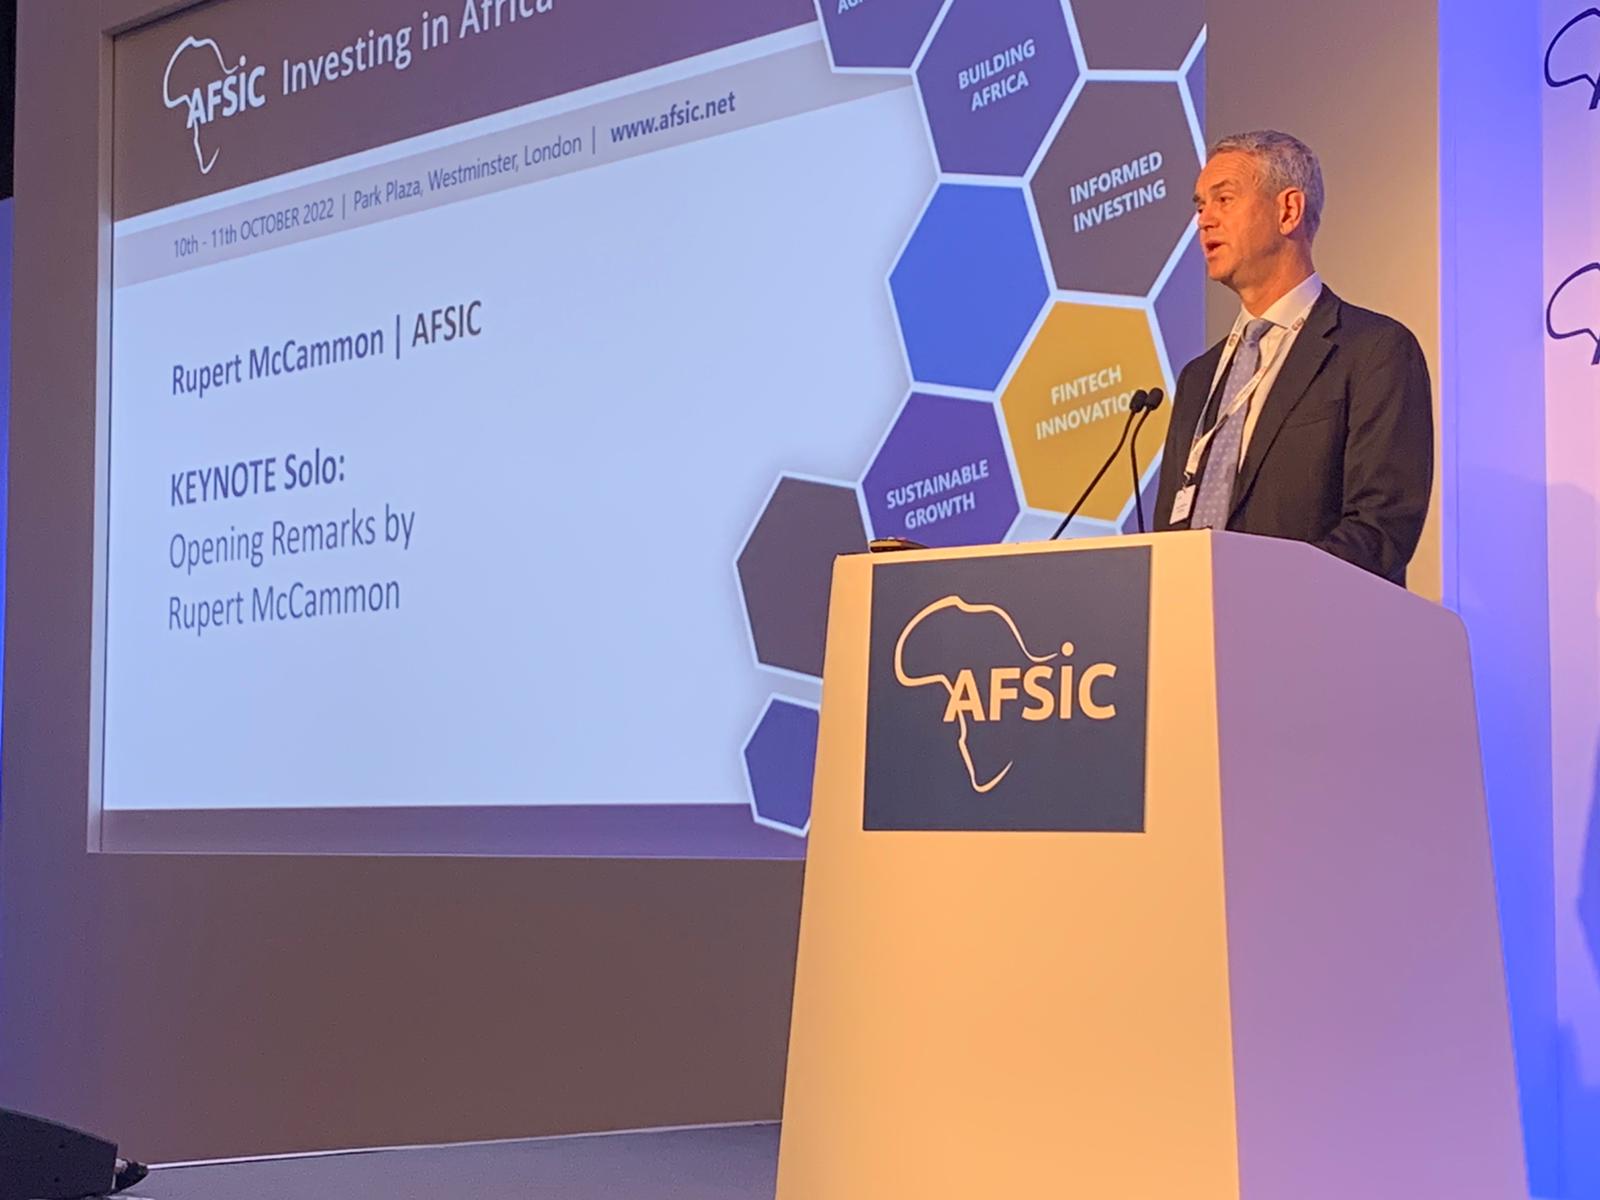 AFSIC – Investing in Africa's Managing Director, Rupert McCammon. speaking at the AFSIC 2022 event (afsic.net)